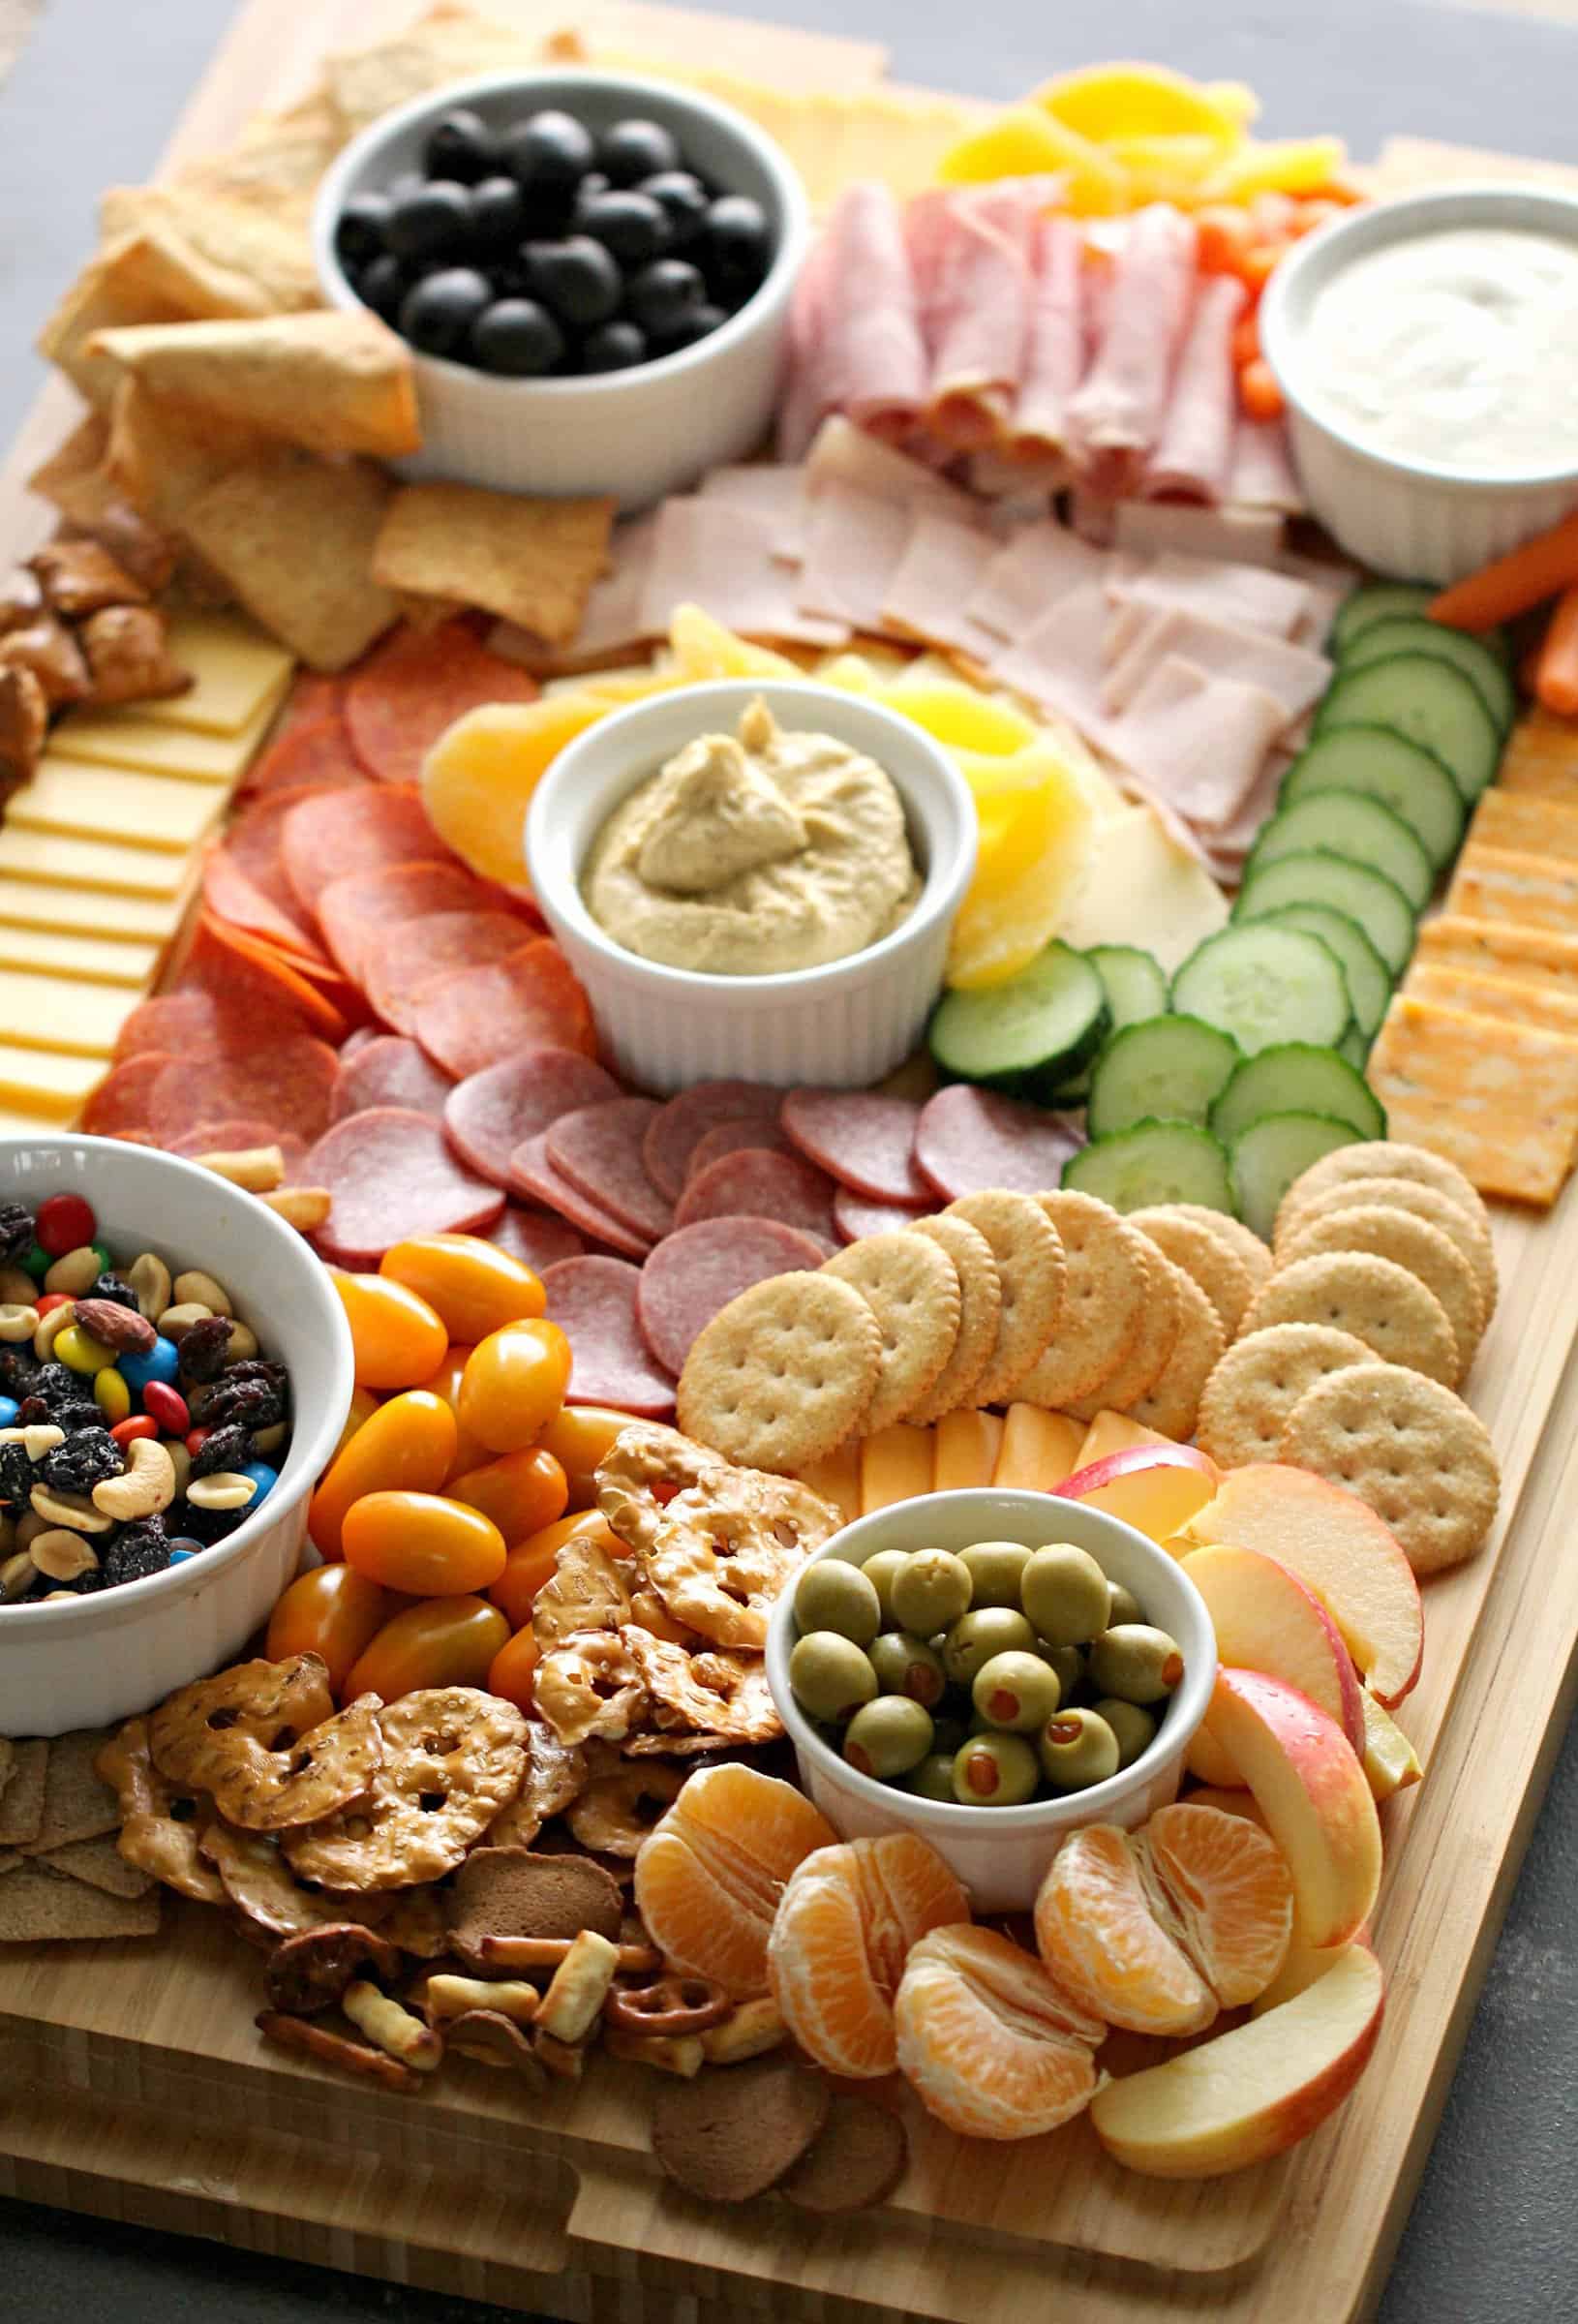 How To Make A Kid-Friendly Charcuterie Board [Step-by-Step]